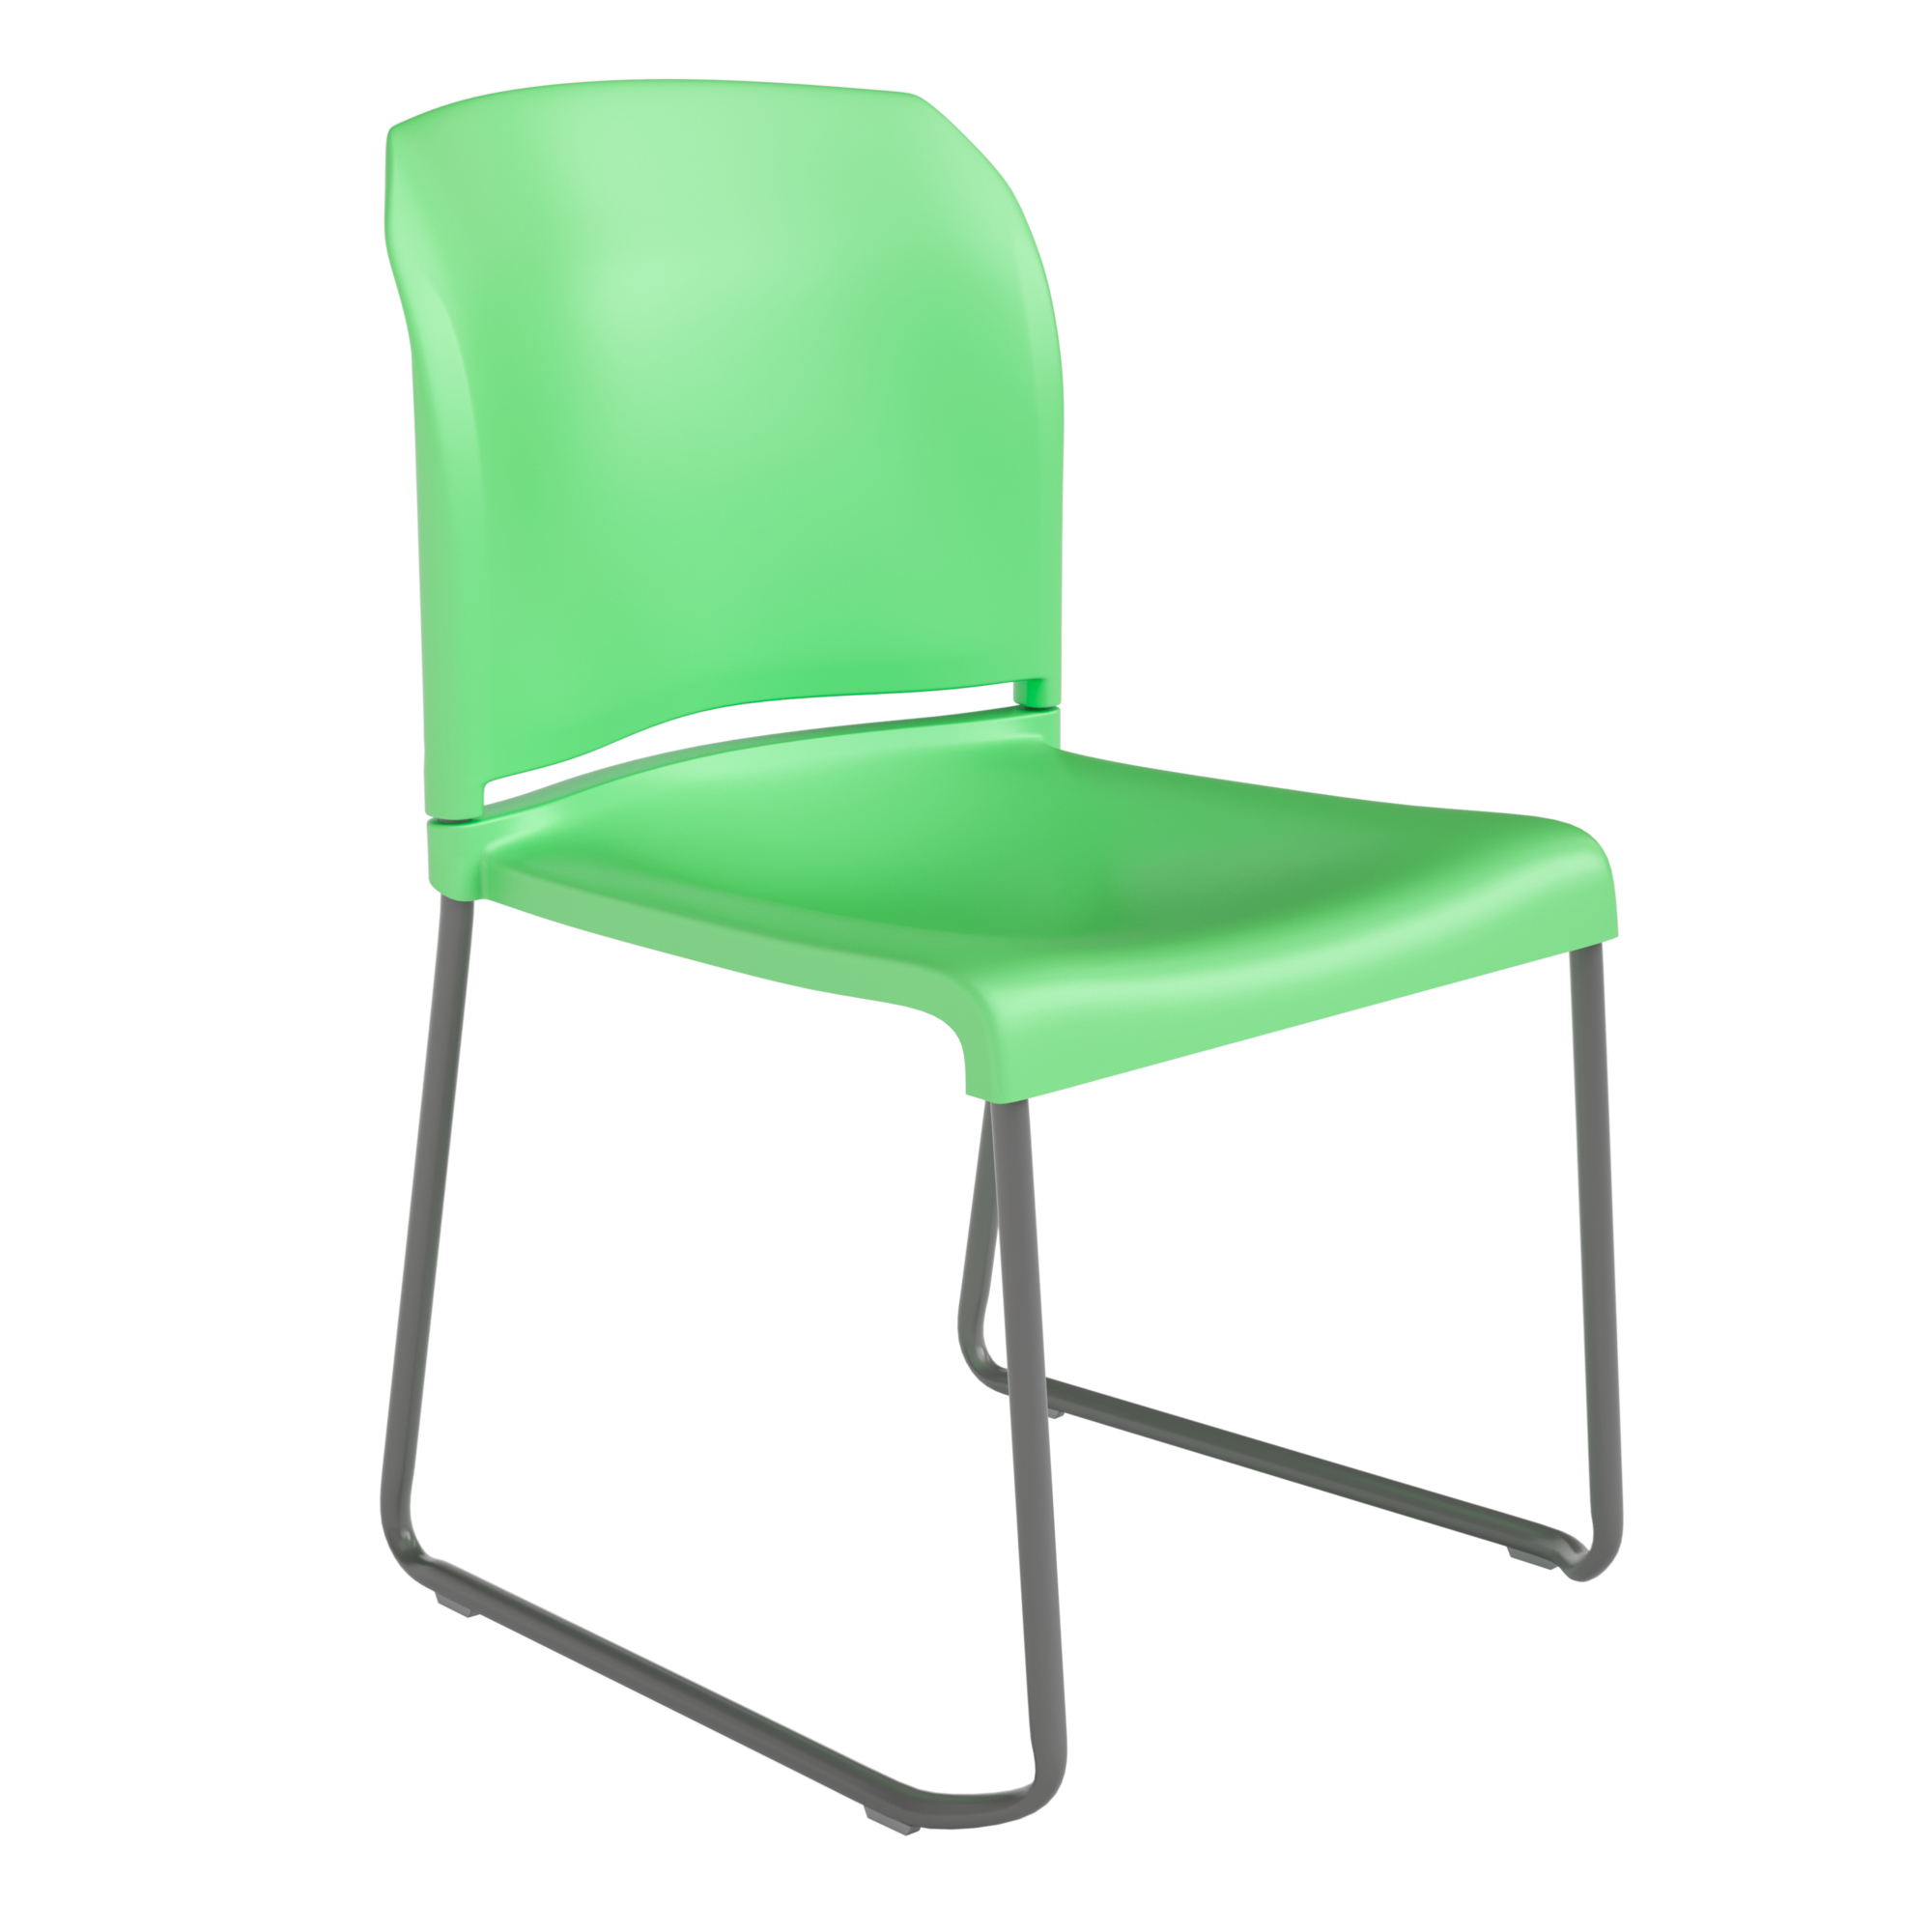 Flash Furniture, 880 lb. Capacity Green Full Back Stack Chair, Primary Color Green, Included (qty.) 1, Model RUT238AGN